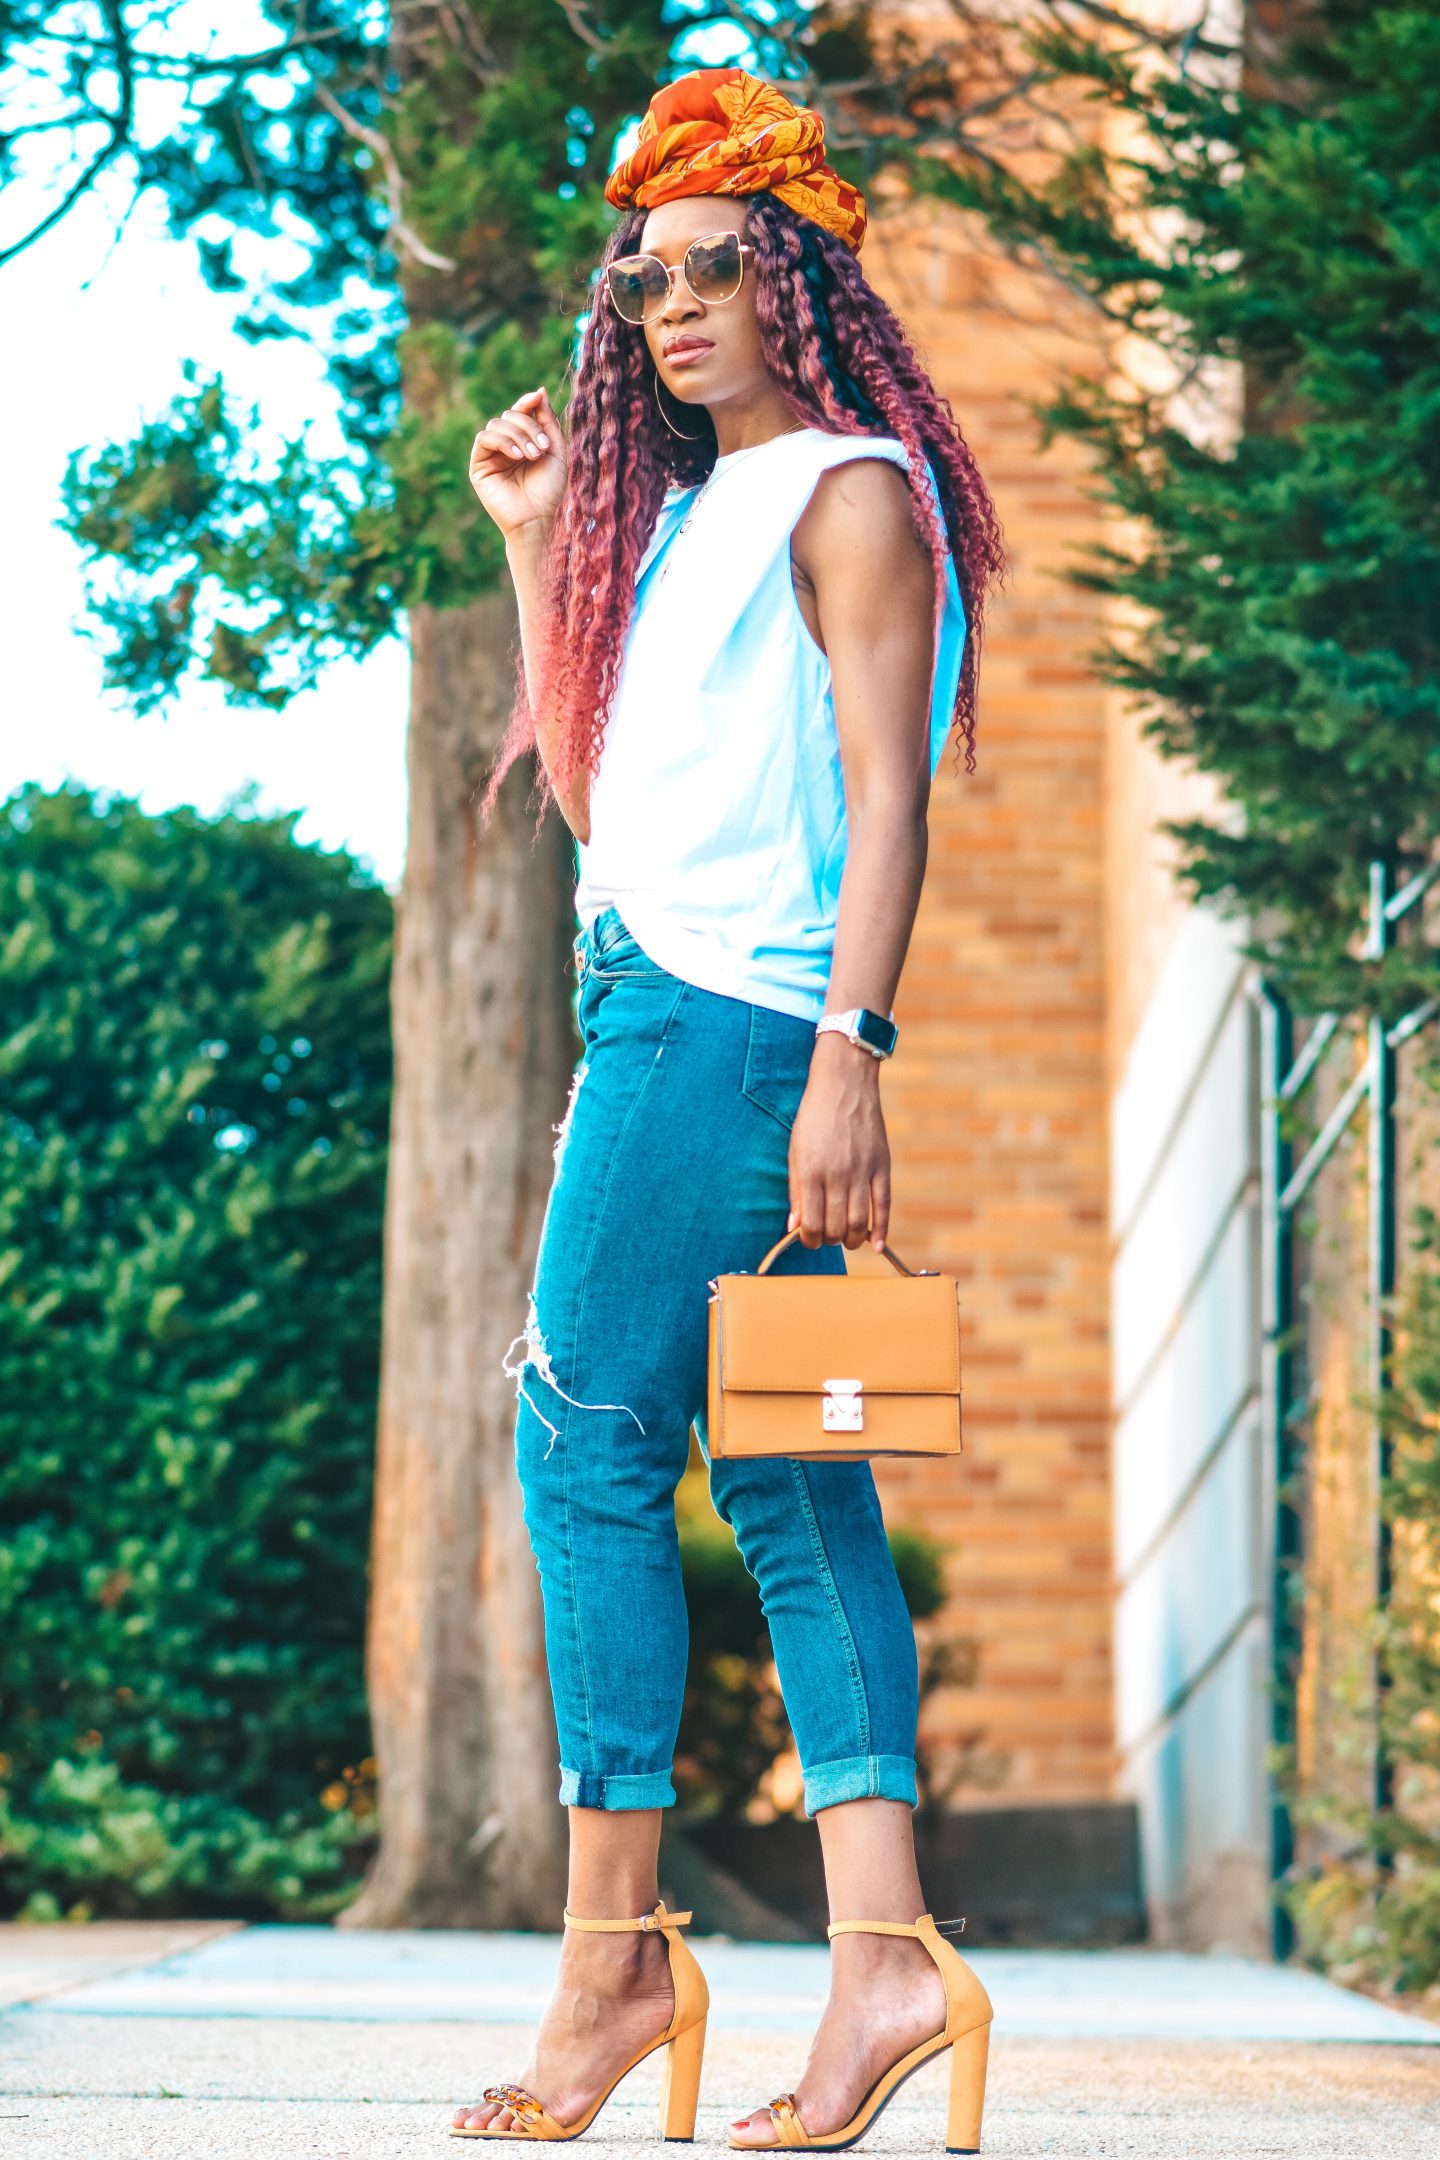 Blogger favorite: The muscle Tee